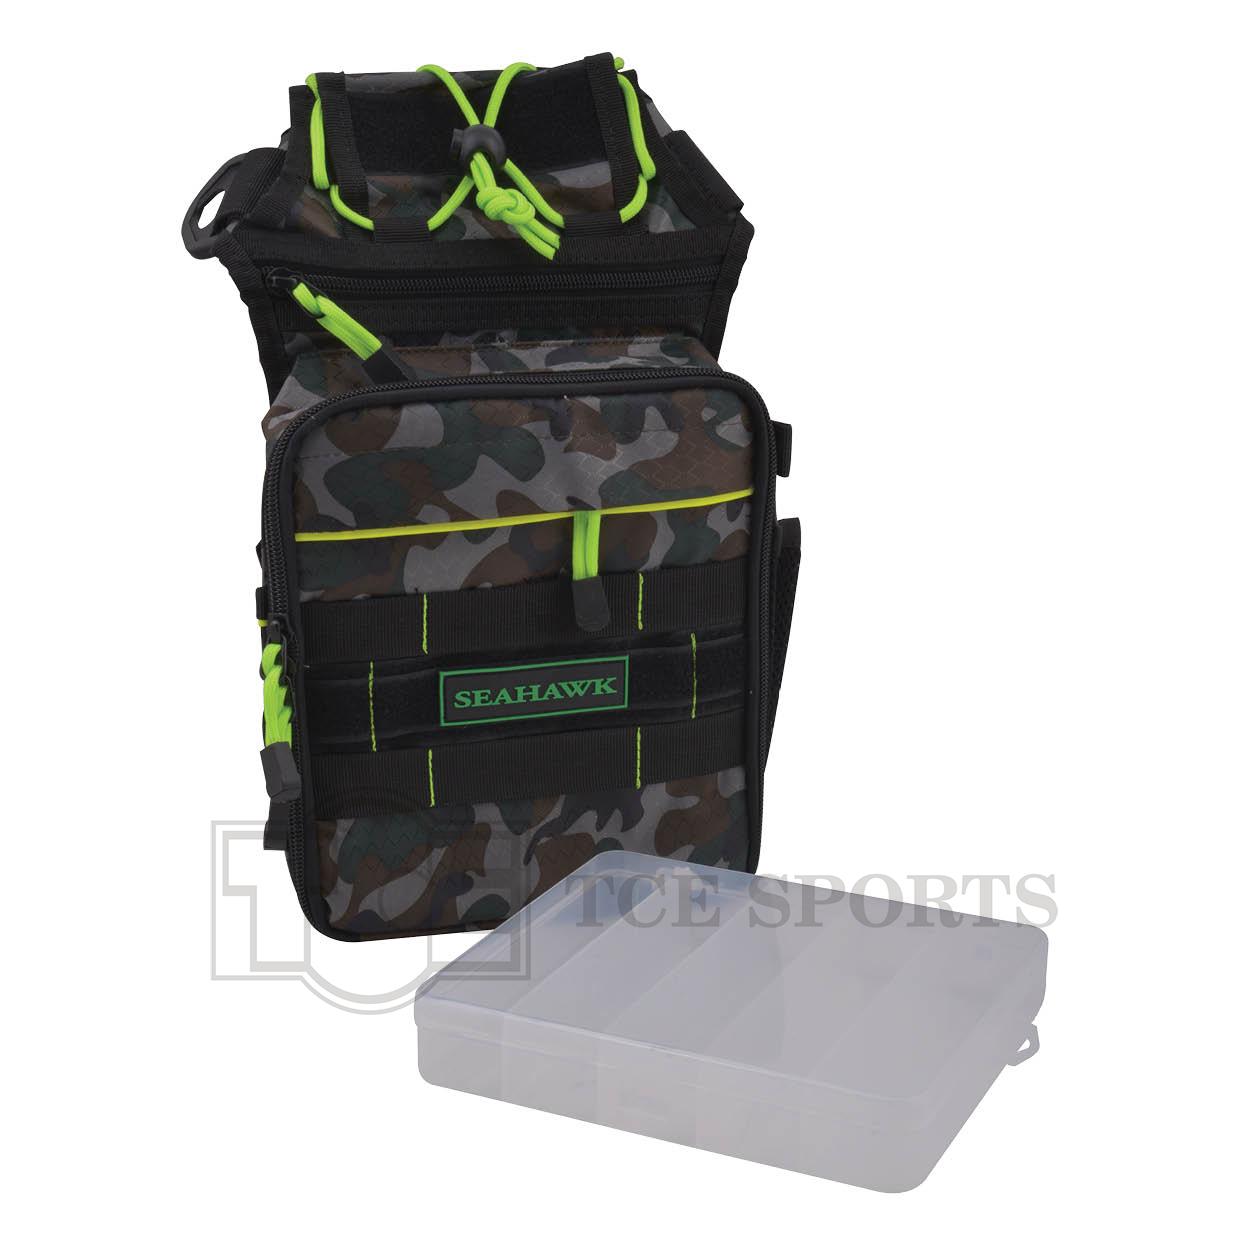 Seahawk - Multi-Waist And Chest Pack With Box - M09C Main